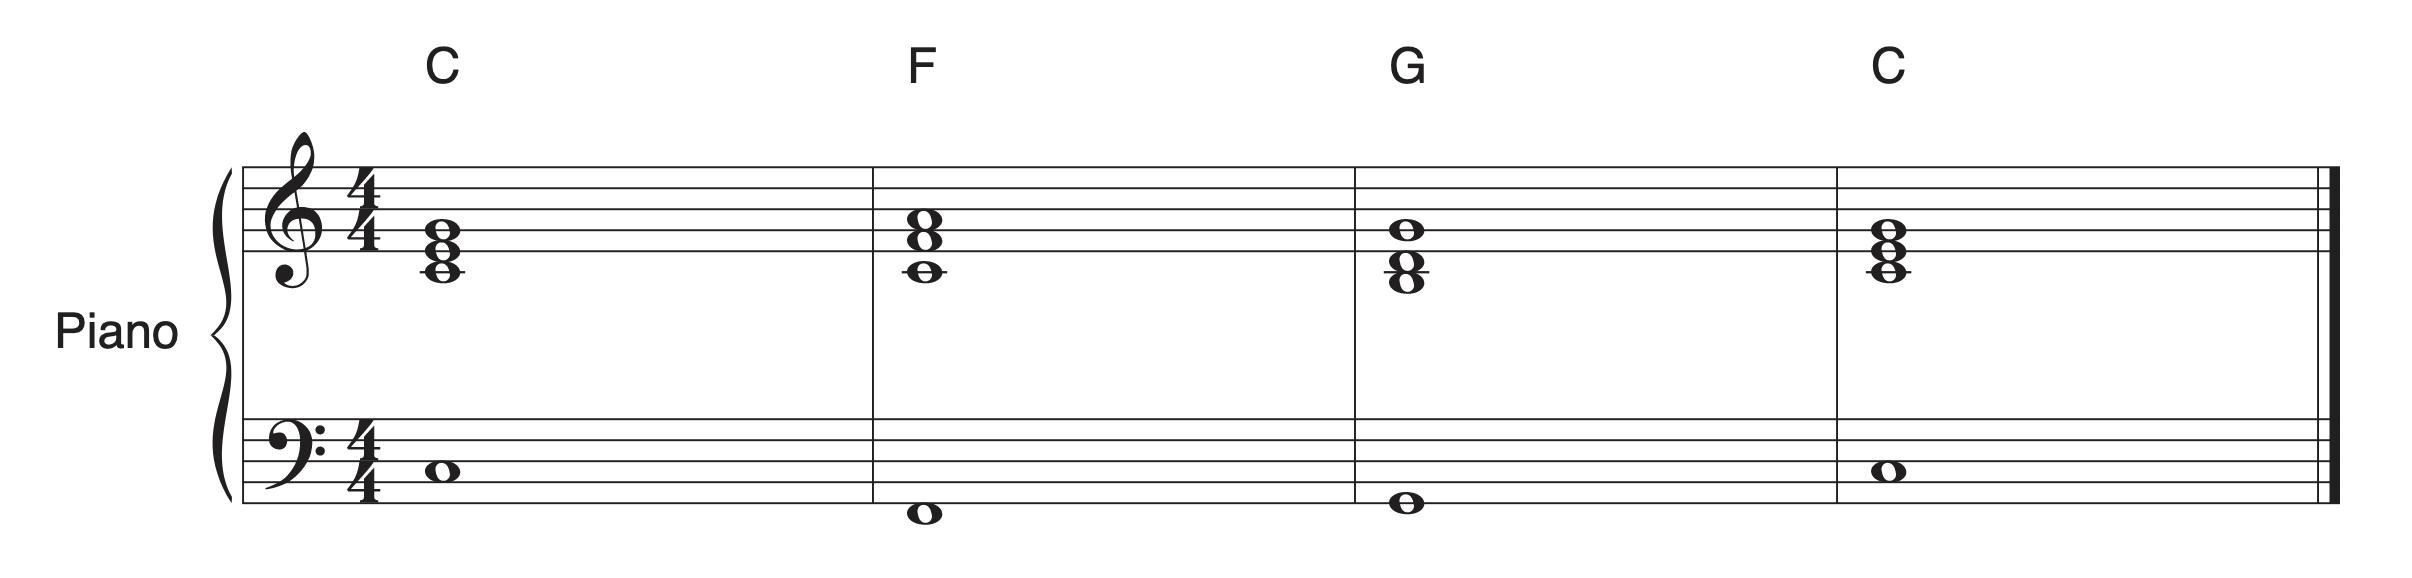 This music notation example shows a chord progression that is written in four parts on a grand staff.